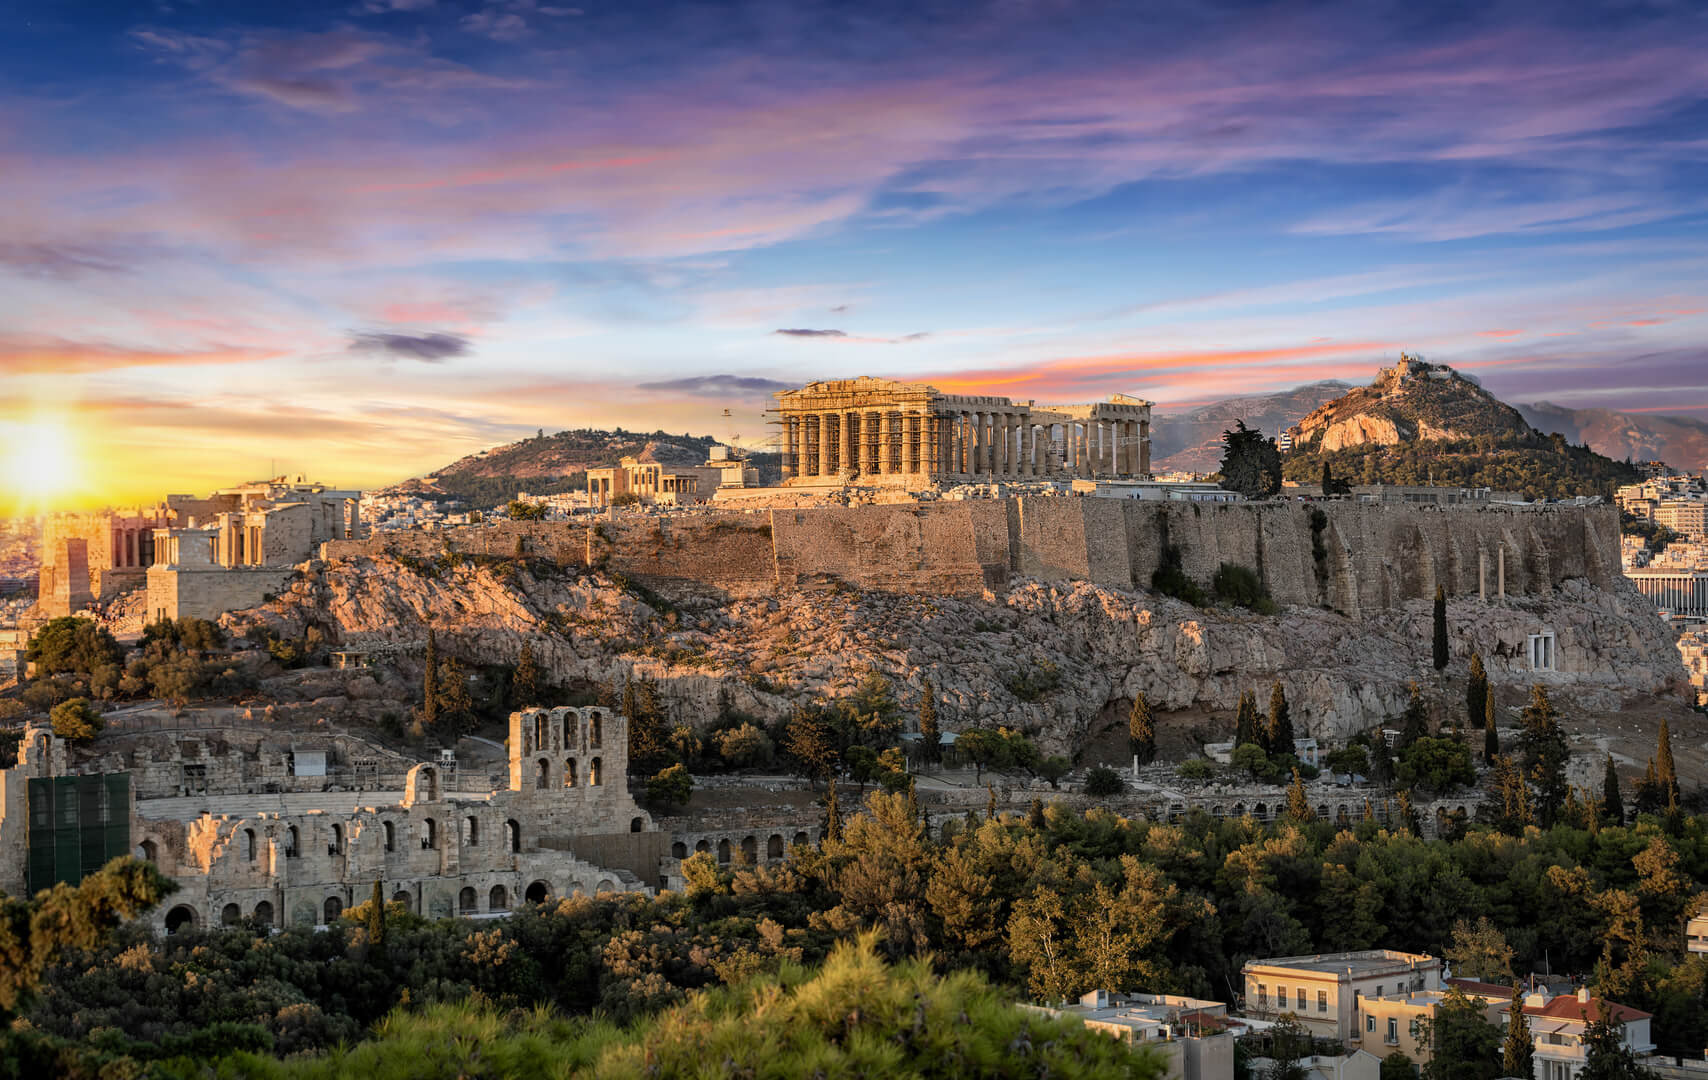 The Parthenon Temple at the Acropolis of Athens, Greece, during colorful sunset
